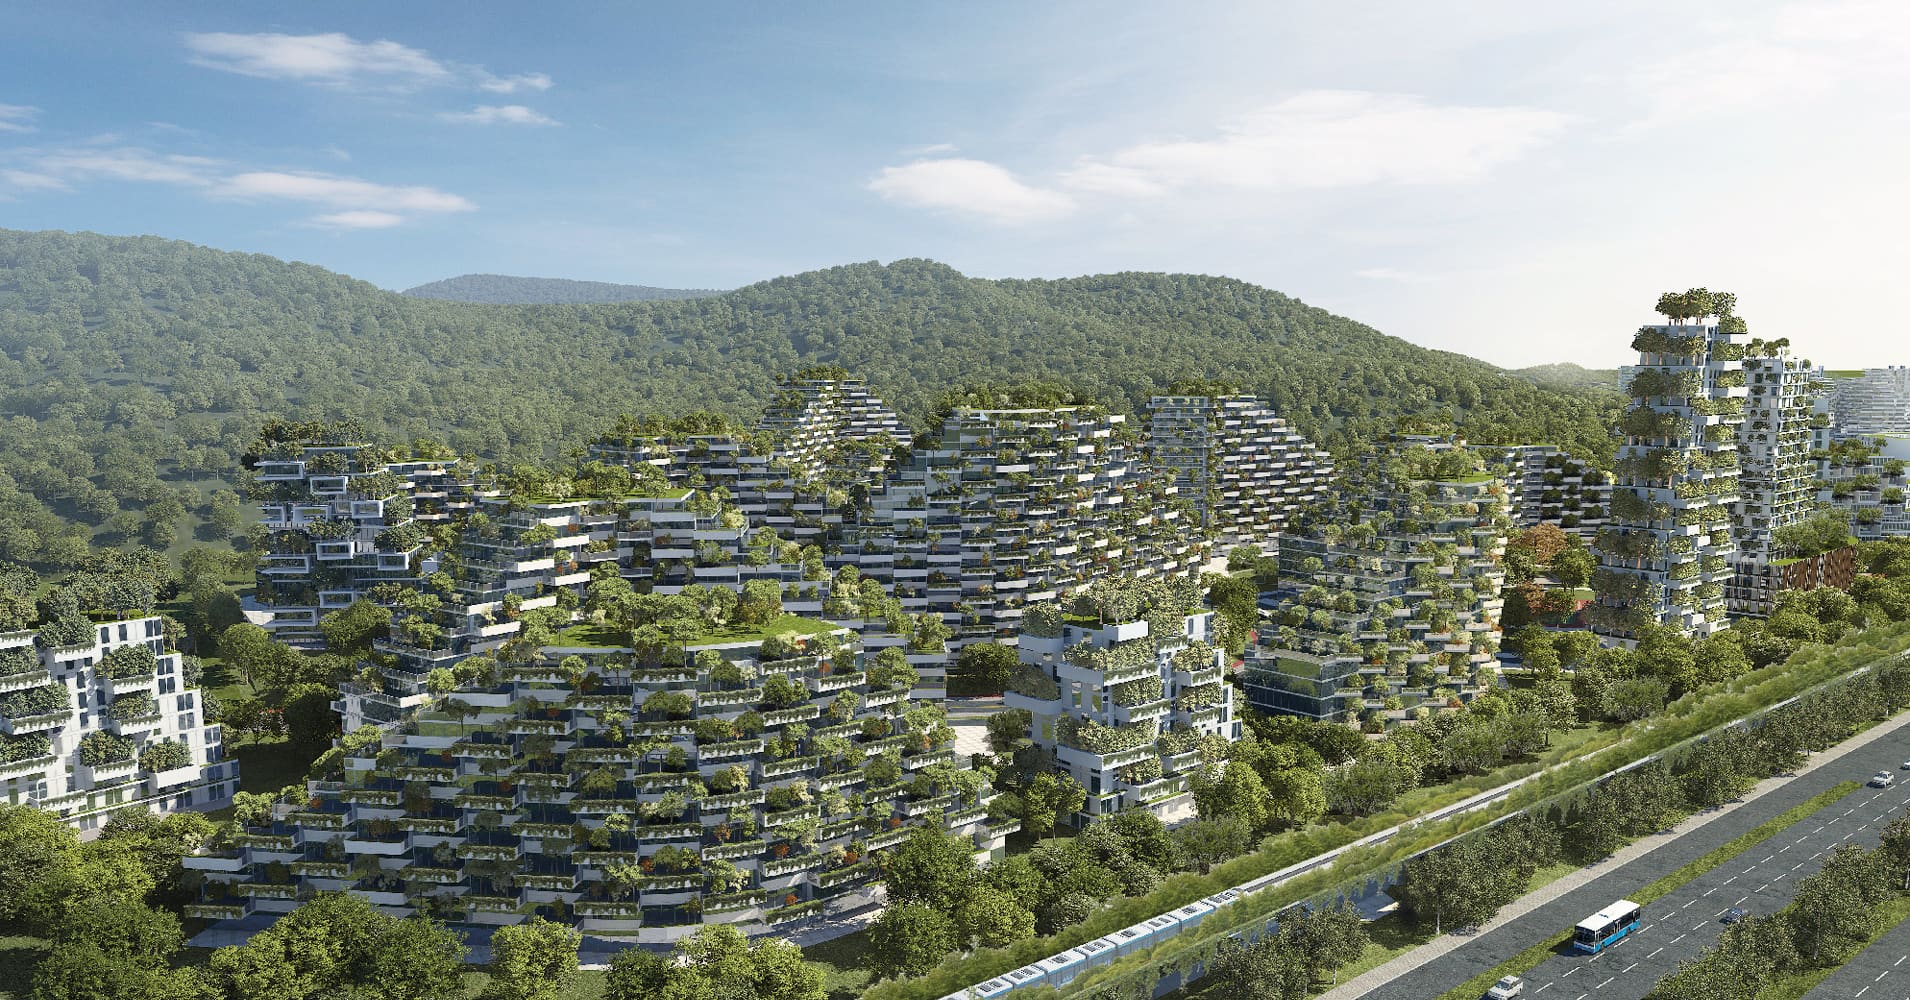 Forest cities: The future of sustainable living